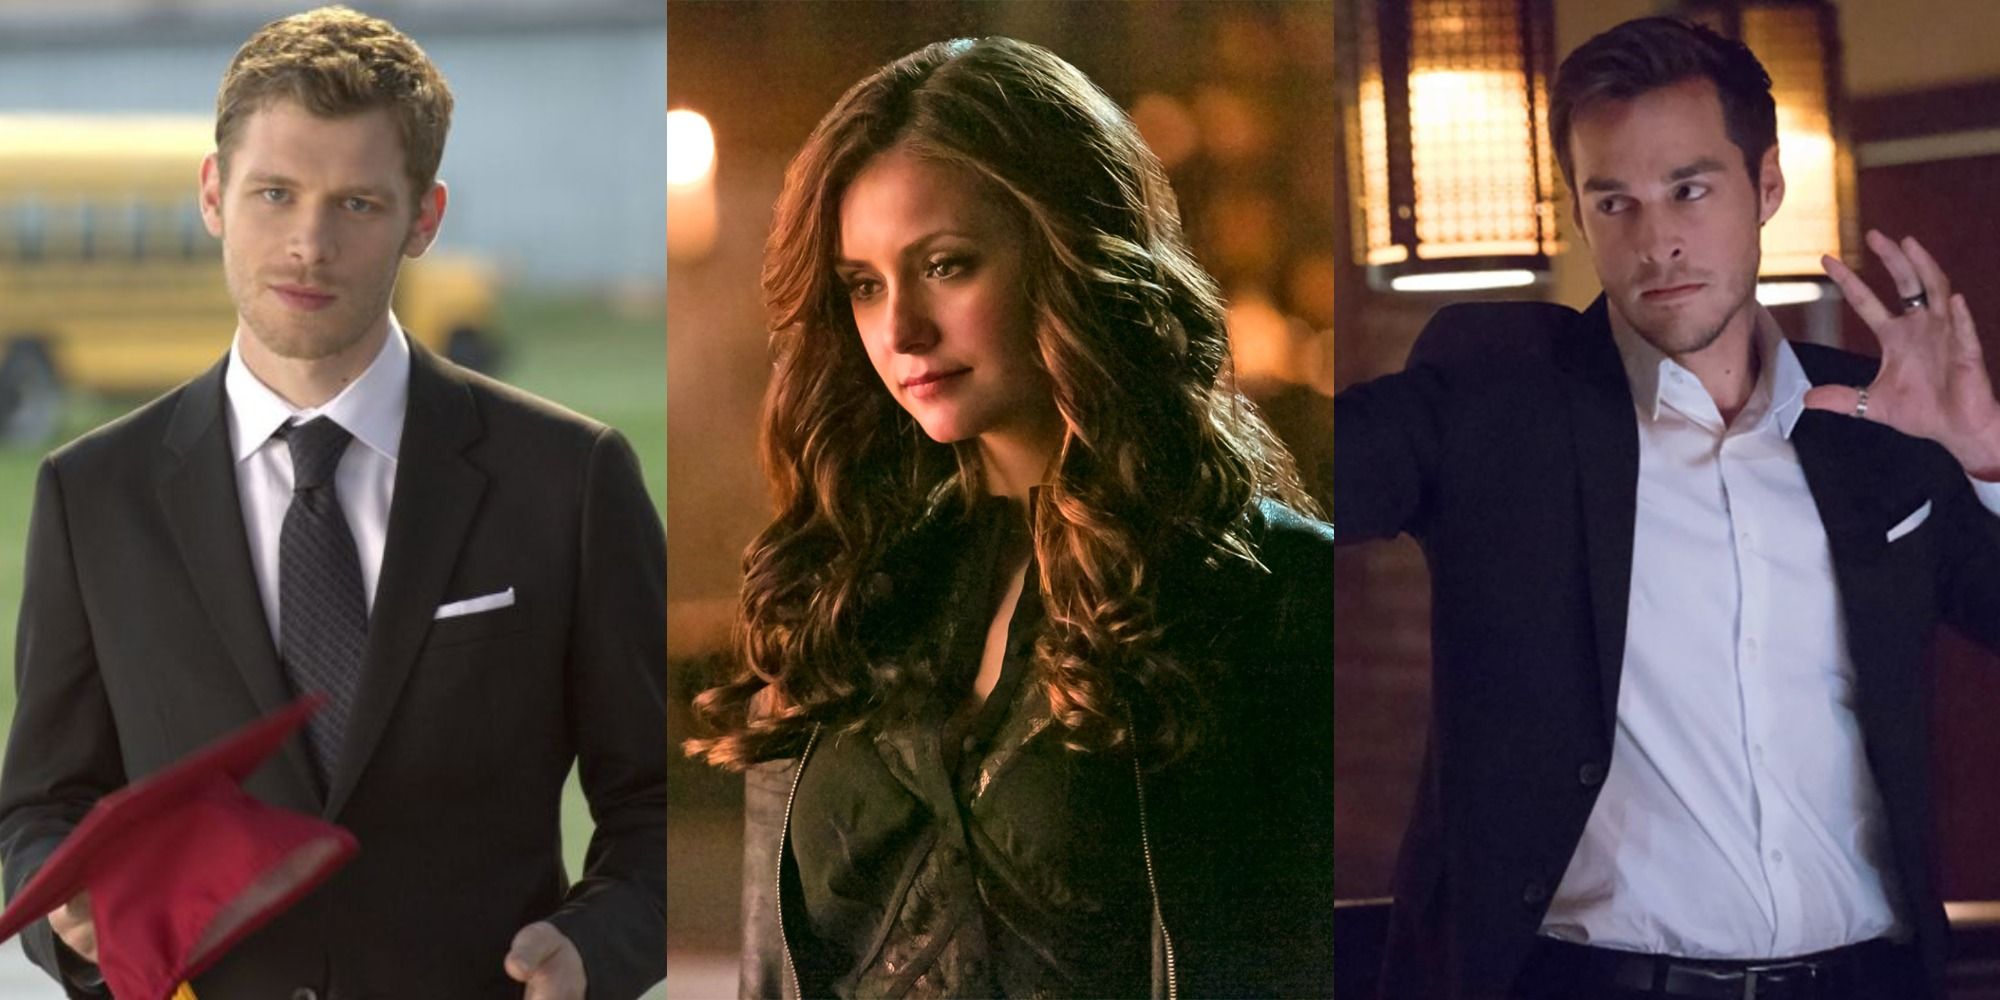 The Vampire Diaries Ranking The Top 10 Villains From Worst To Pure Evil